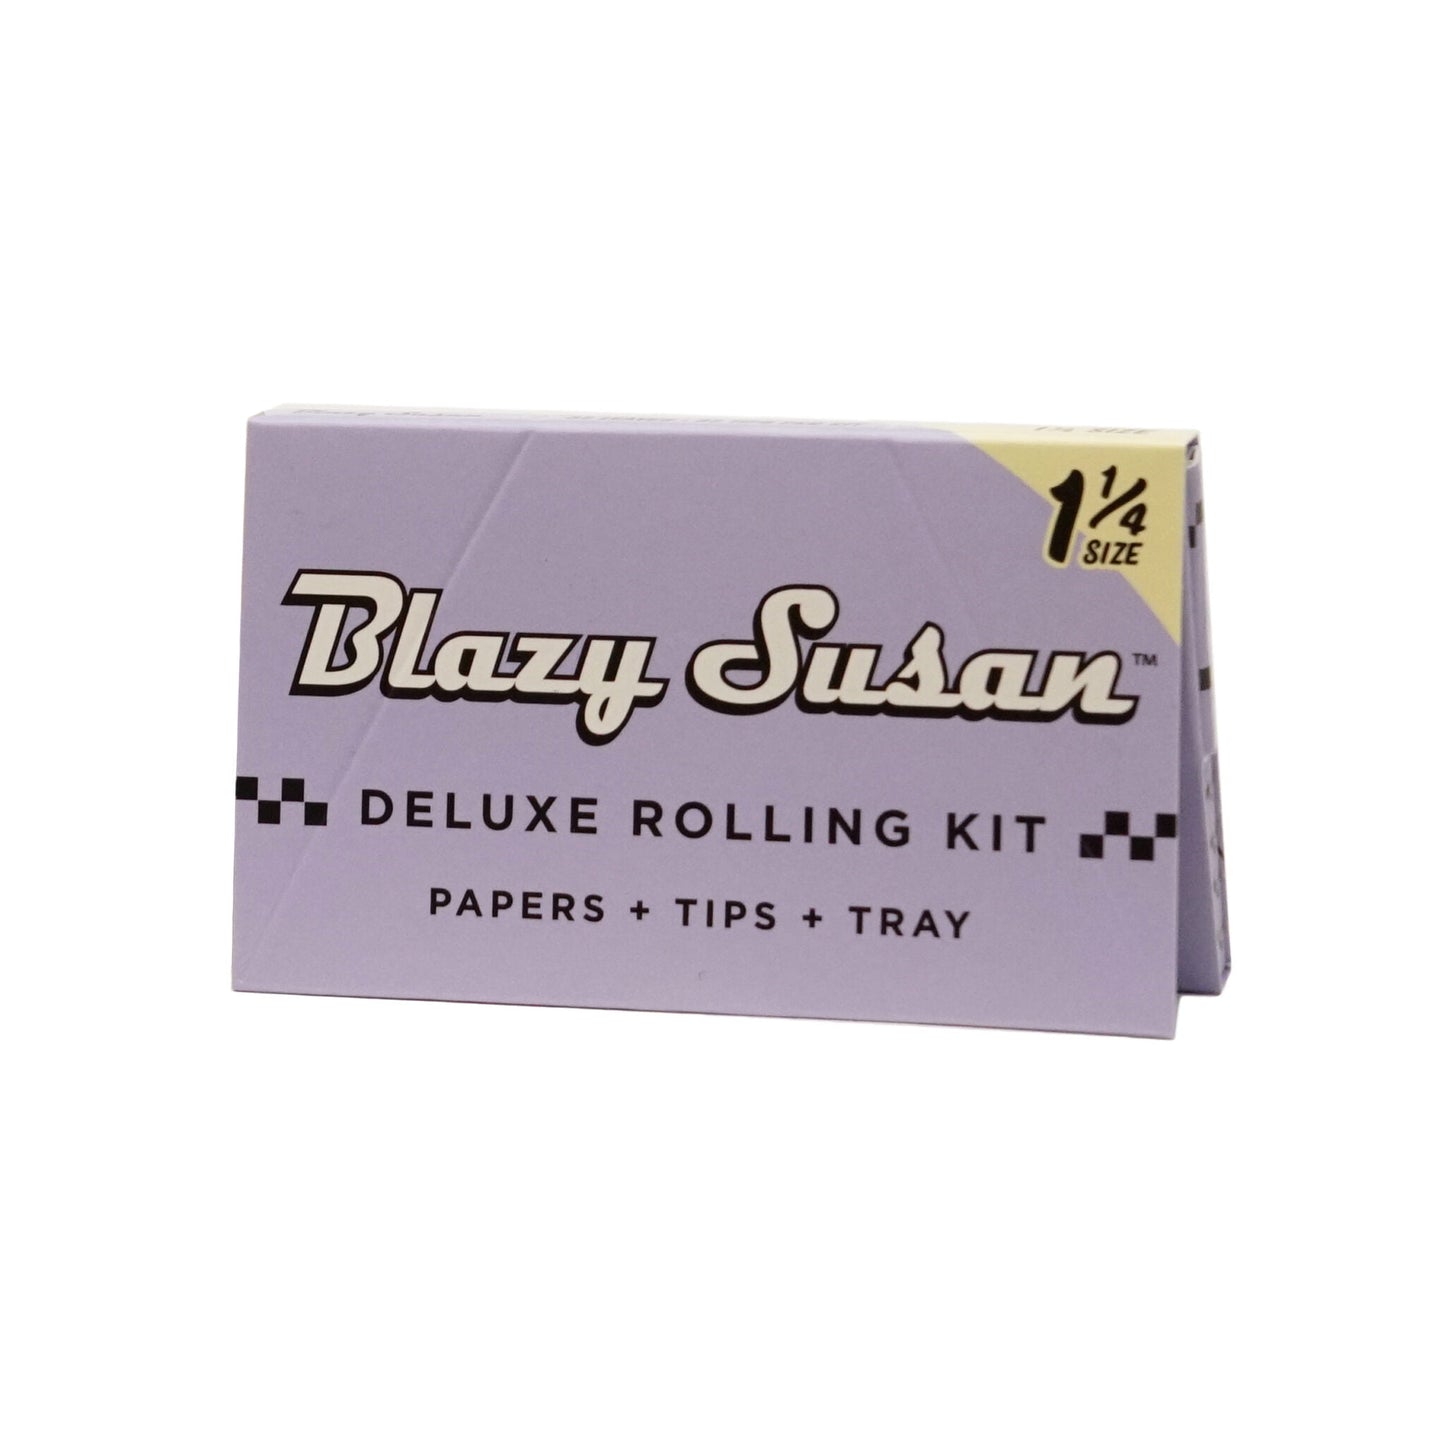 Blazy Susan - Purple Deluxe Rolling Papers (1 1/4)